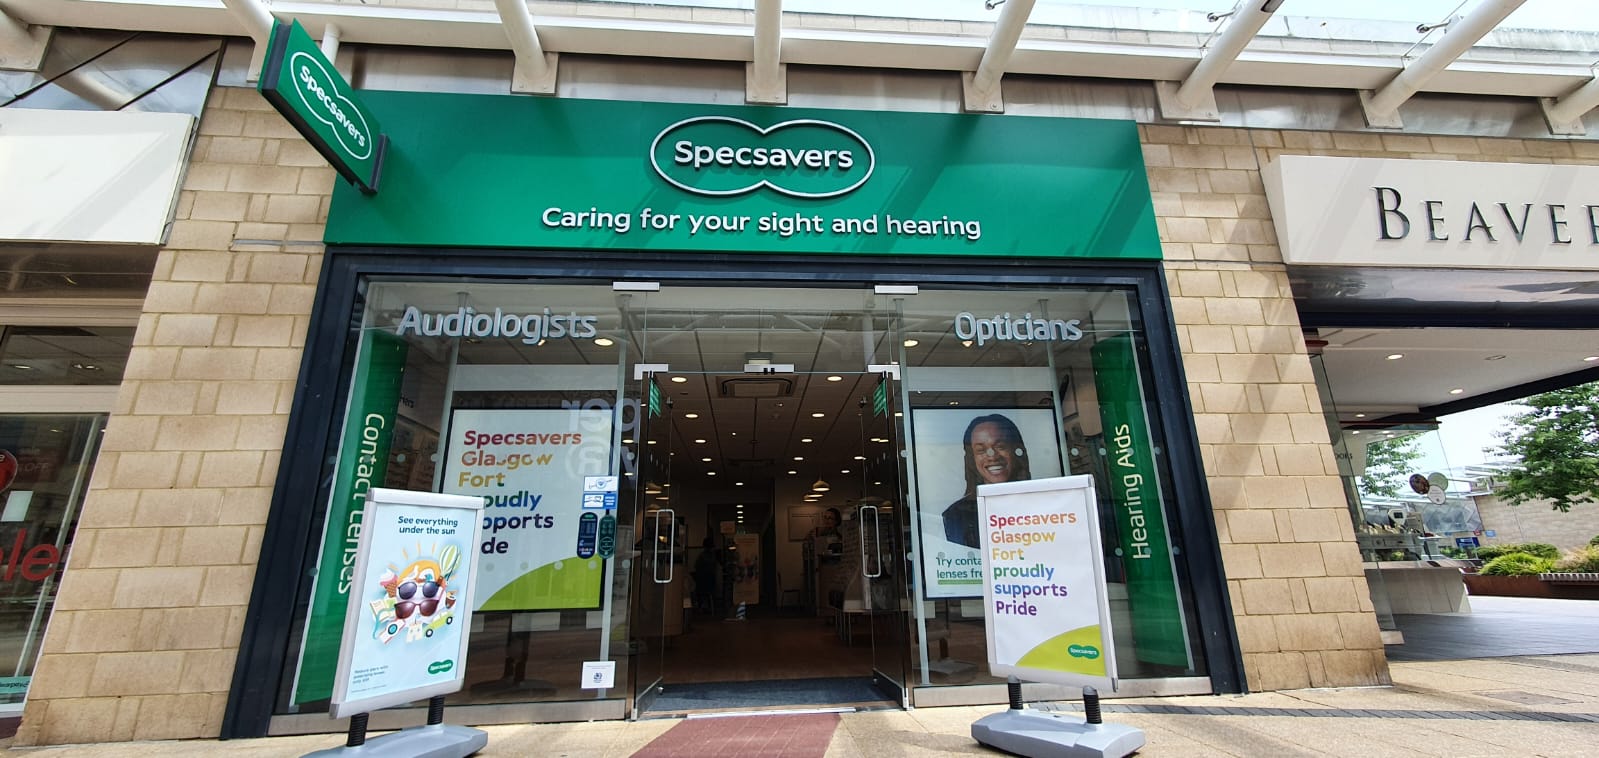 Glasgow Fort Specsavers Specsavers Opticians and Audiologists - Glasgow Fort Glasgow 01417 710871